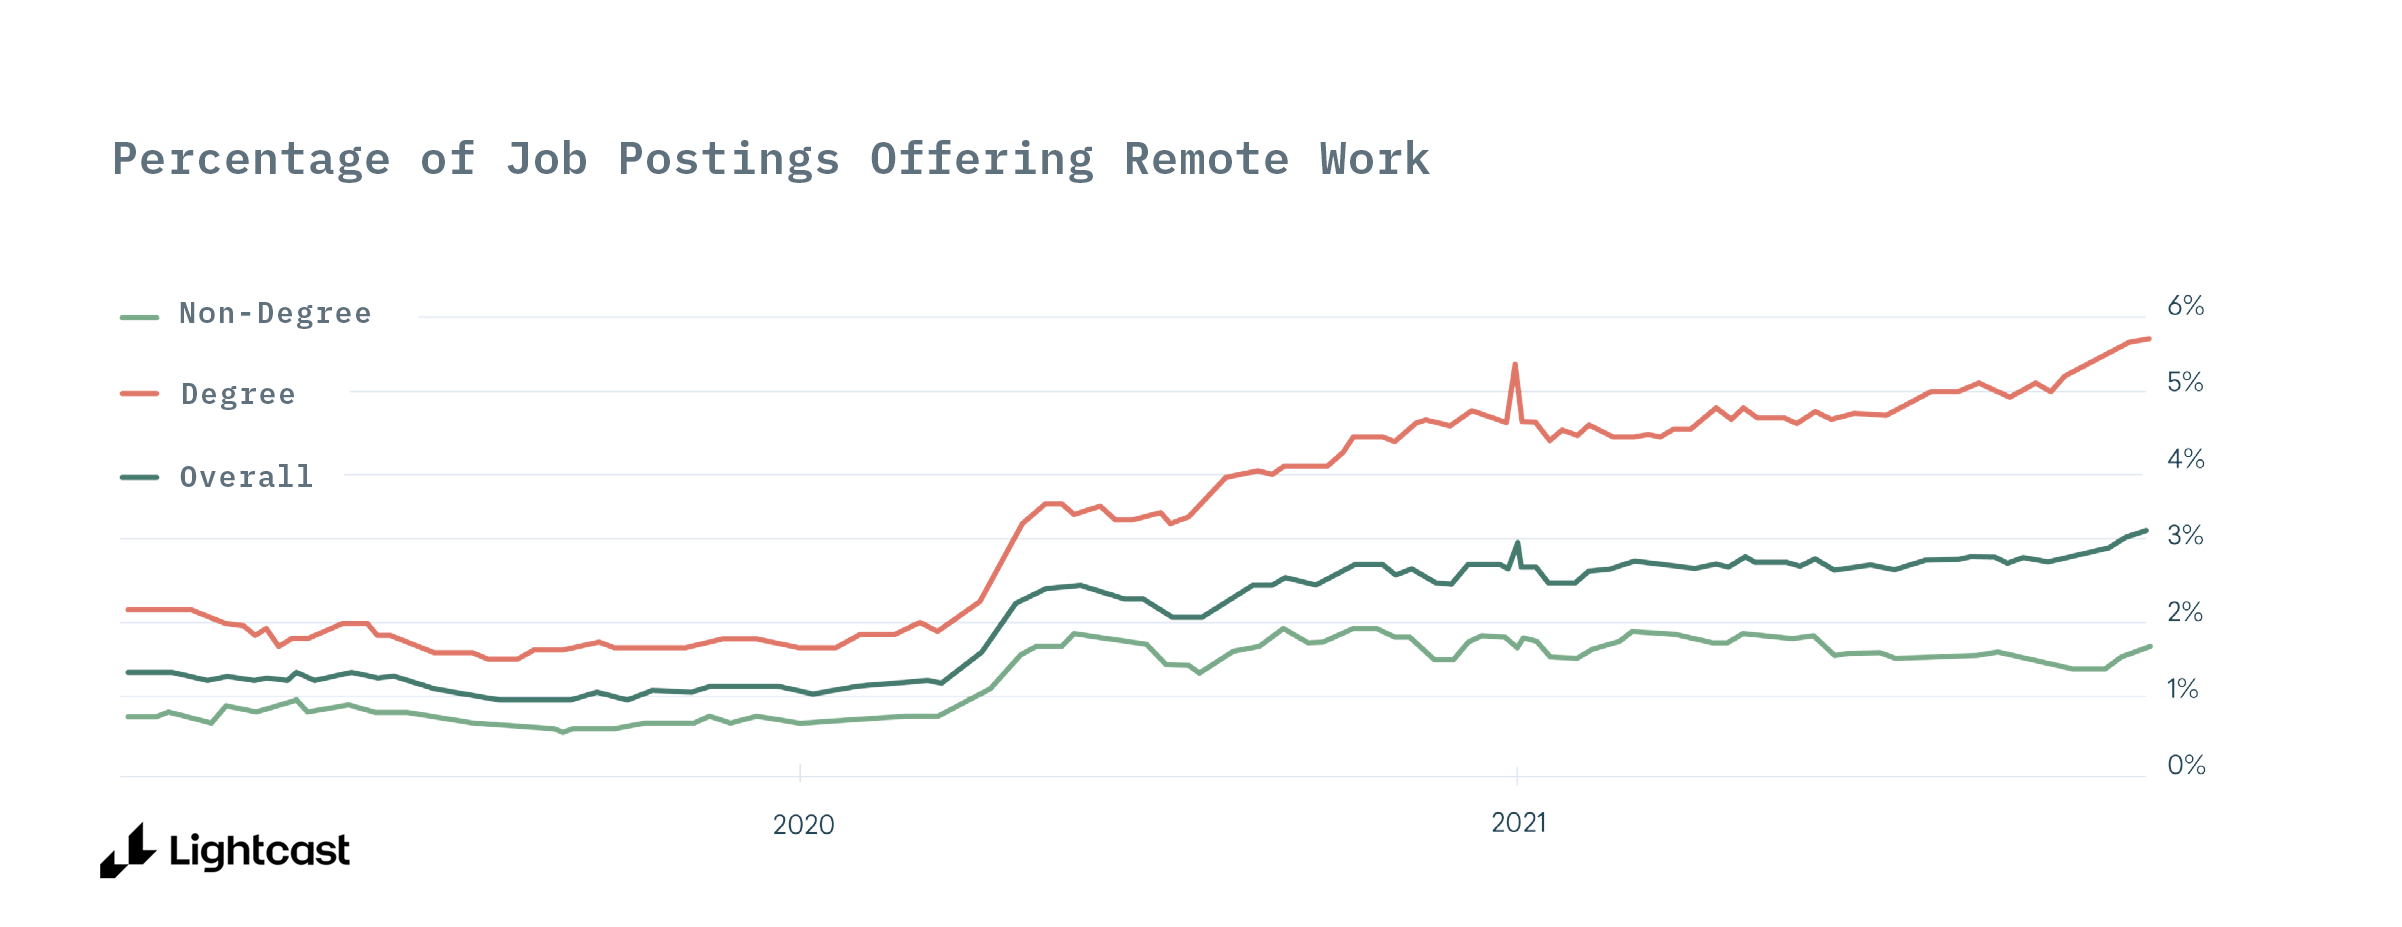 Graph showing percentage of job postings offering remote work